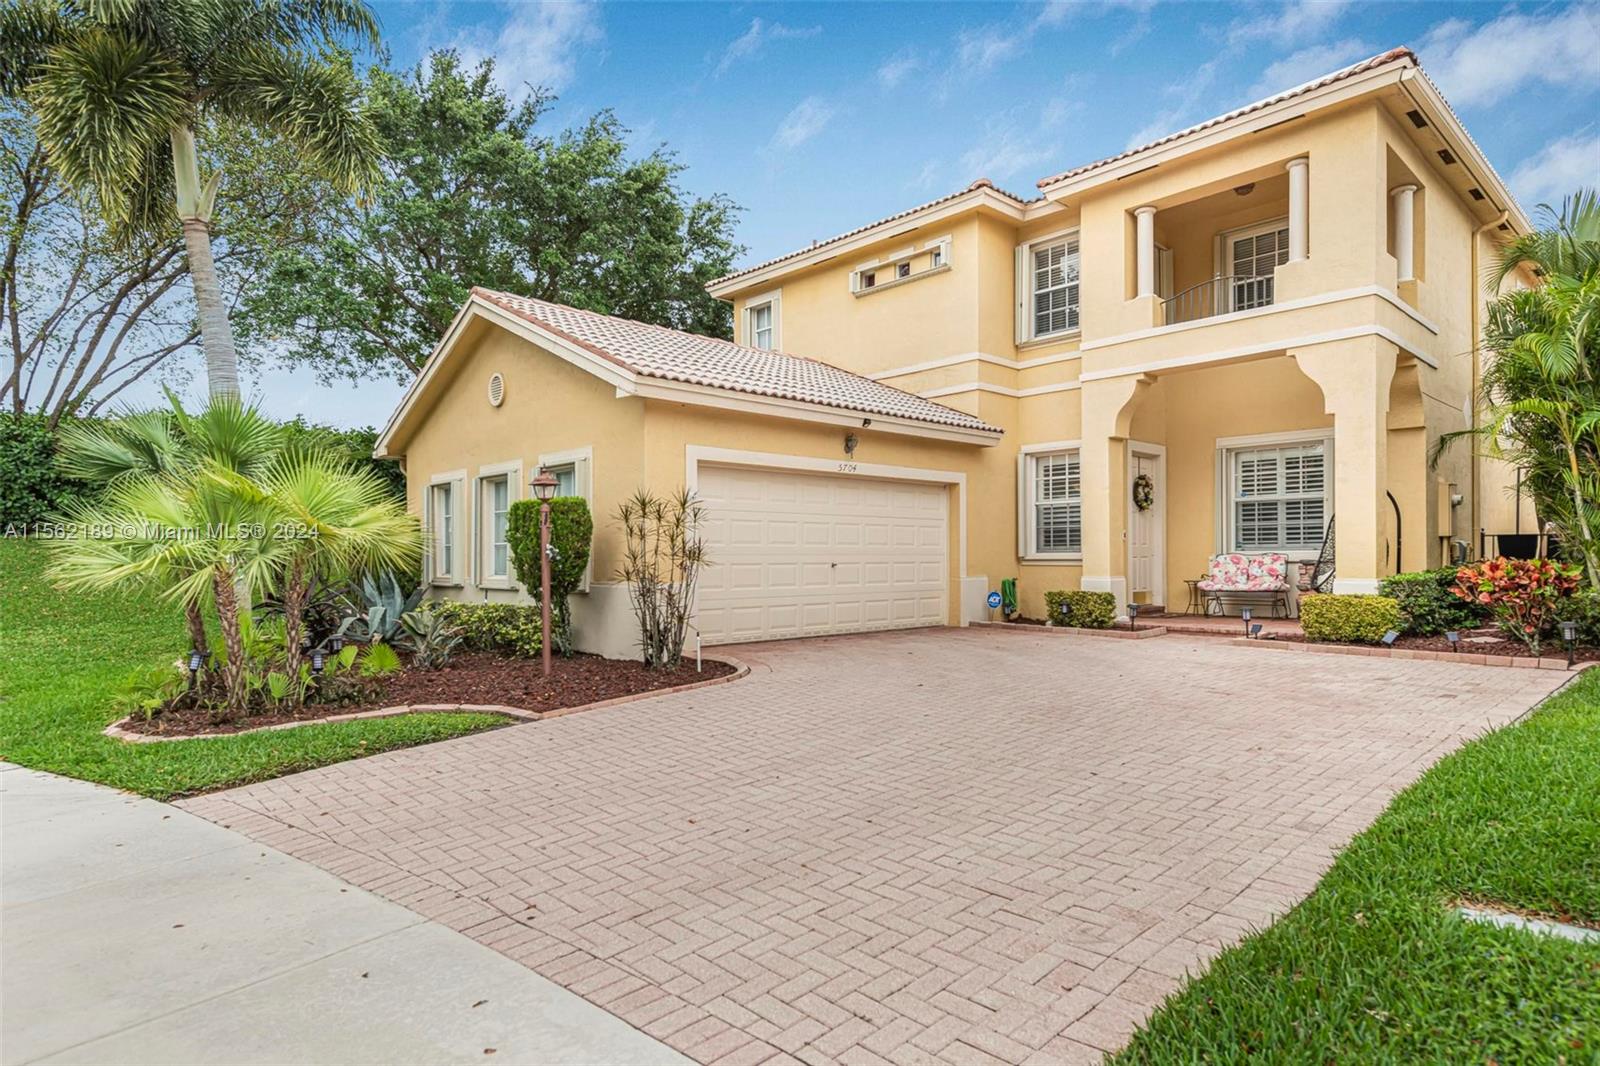 5704 Nw 121st Ave, Coral Springs, Broward County, Florida - 4 Bedrooms  
3 Bathrooms - 